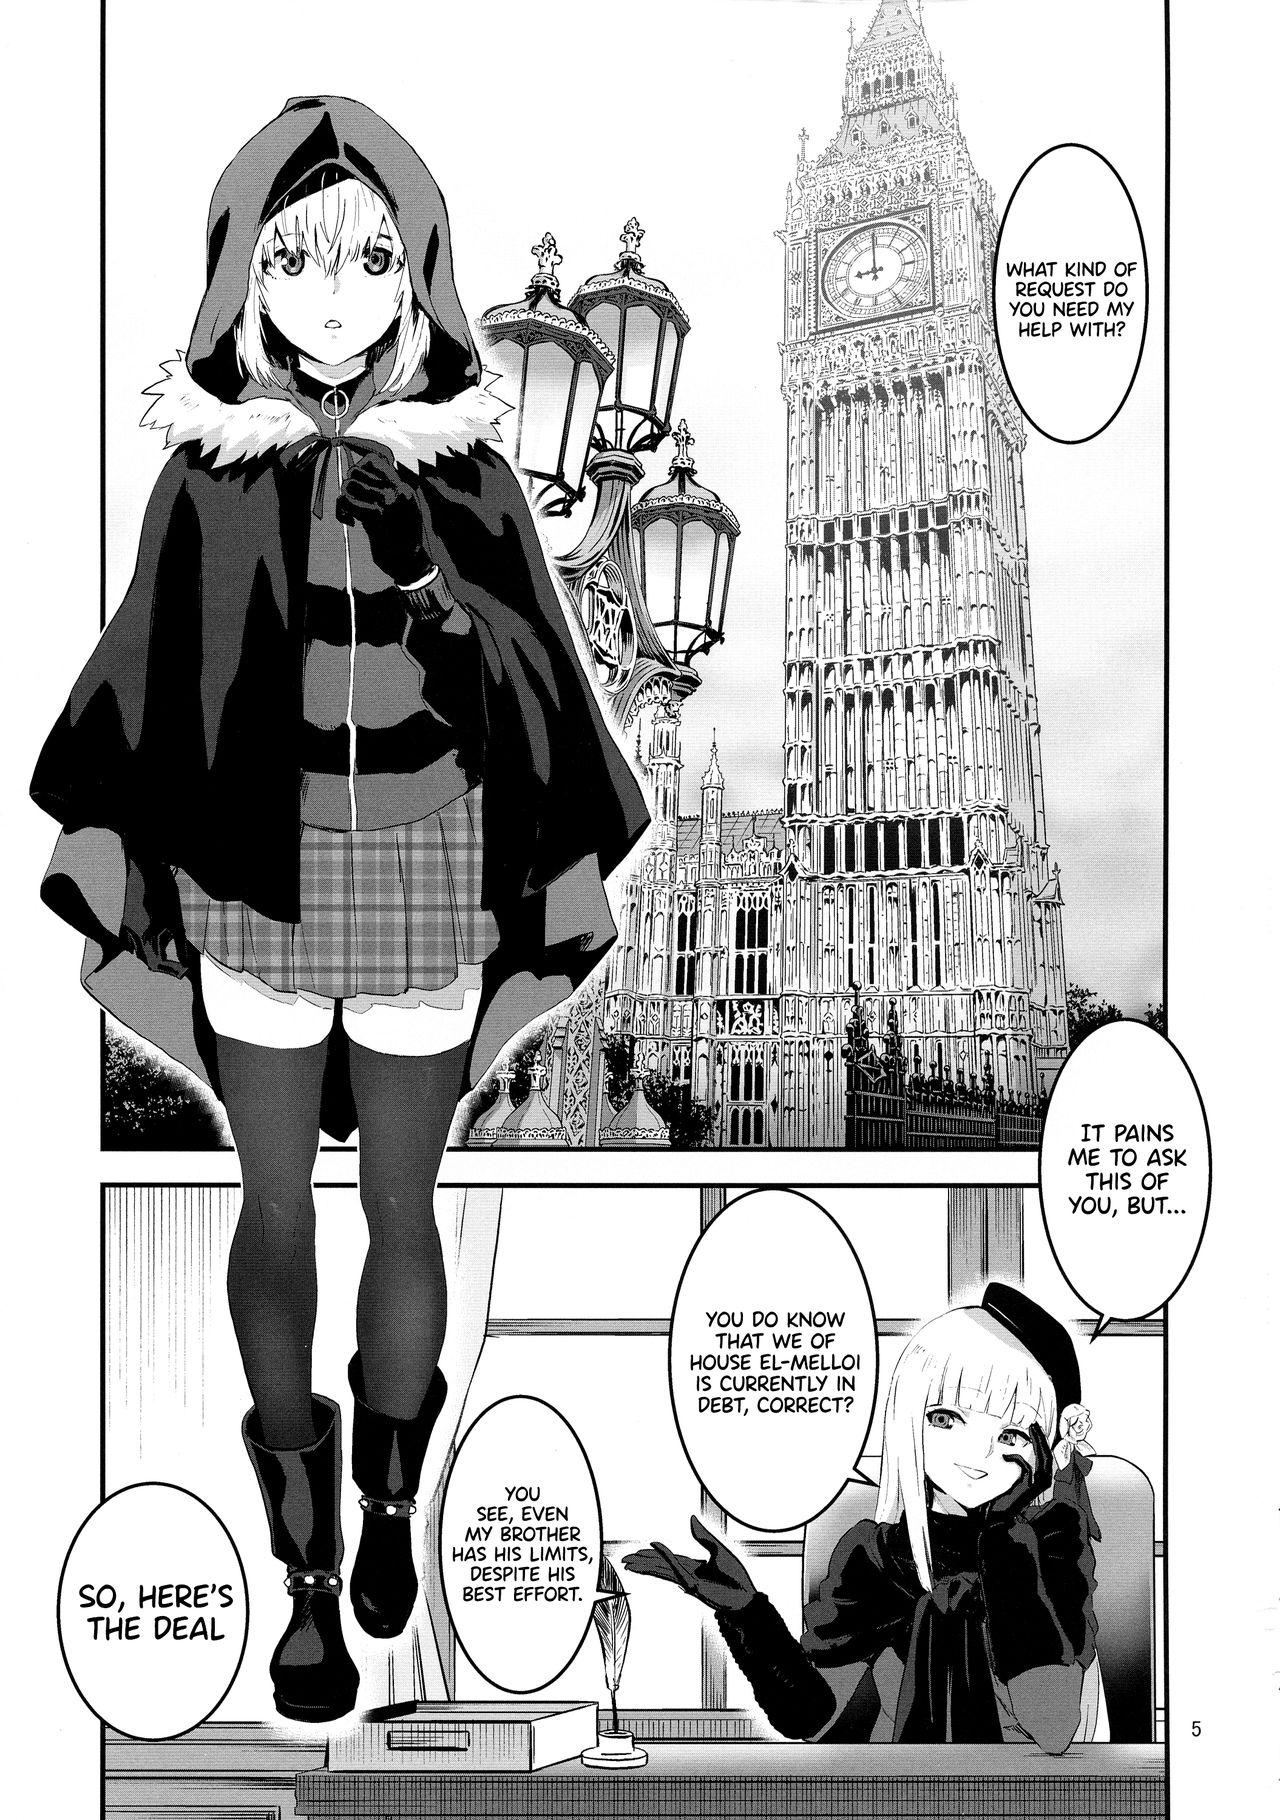 Reality Porn Taking Advantage of Gray-chan Weakness, We Graduated from our Virginity. - Lord el-melloi ii sei no jikenbo Cum - Page 5